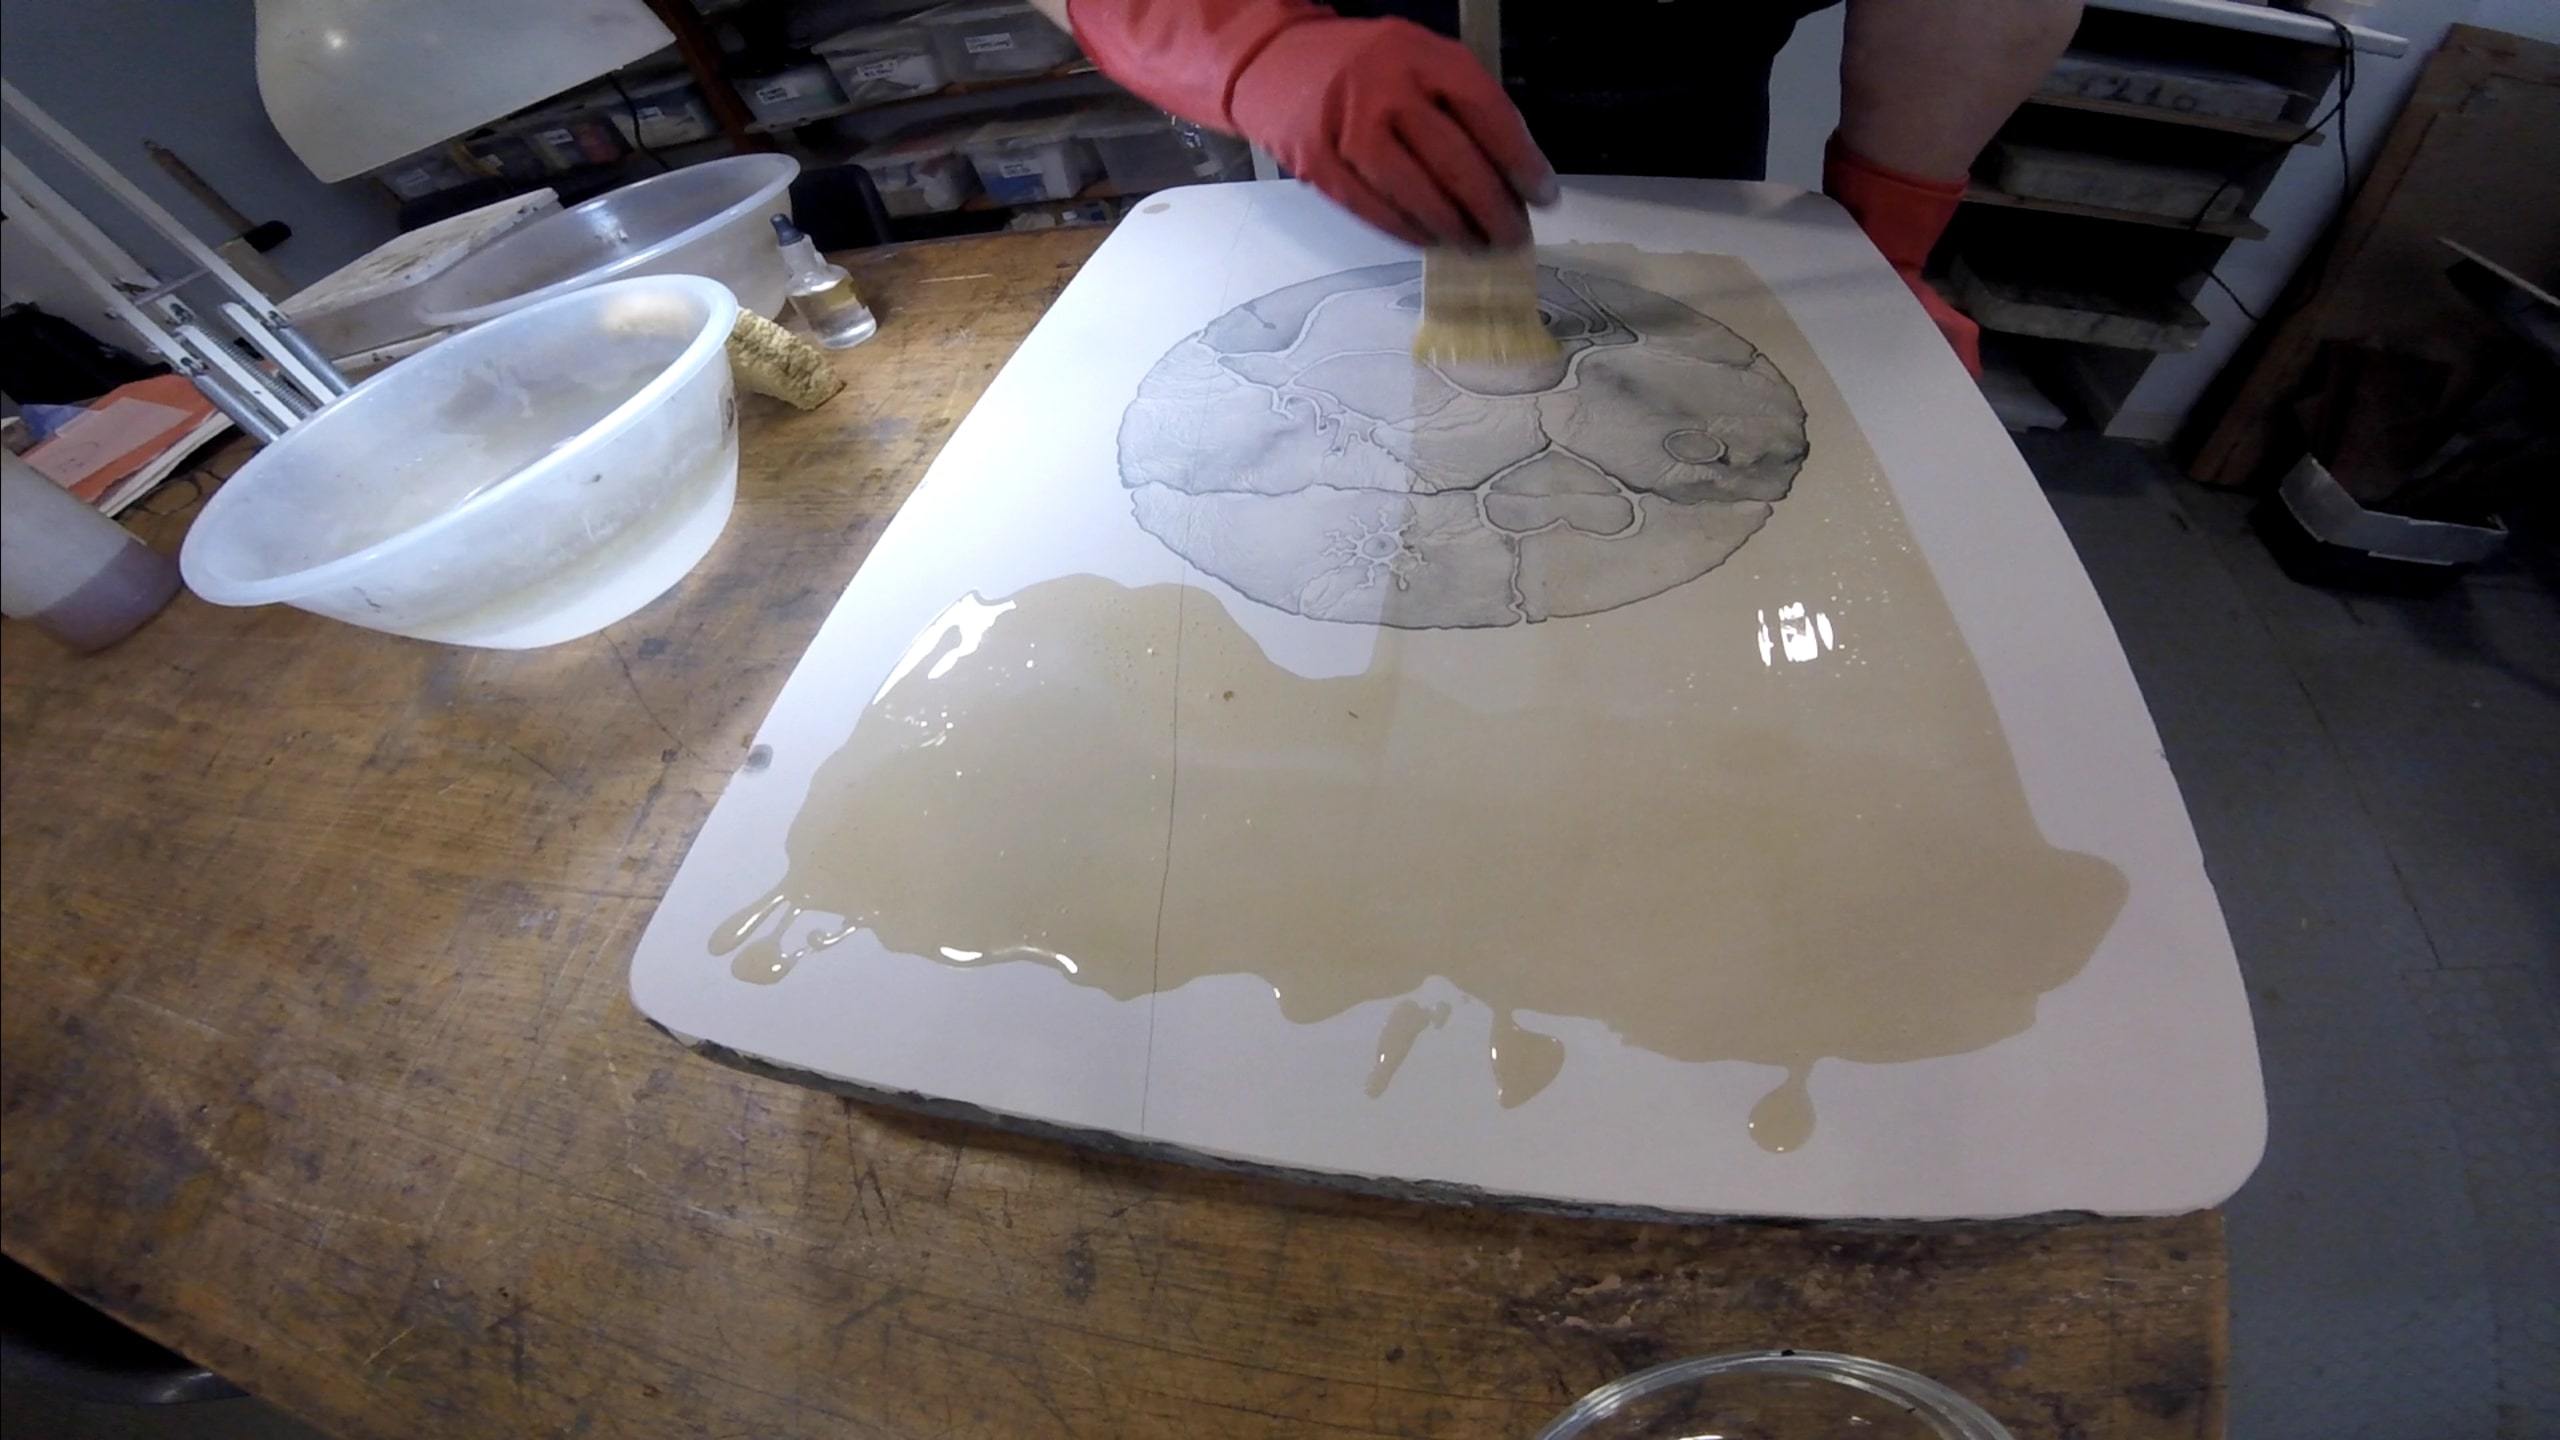 Stone Lithography taking place with a person painting an emulsion of nitric acid and gum arabic to harden this layer